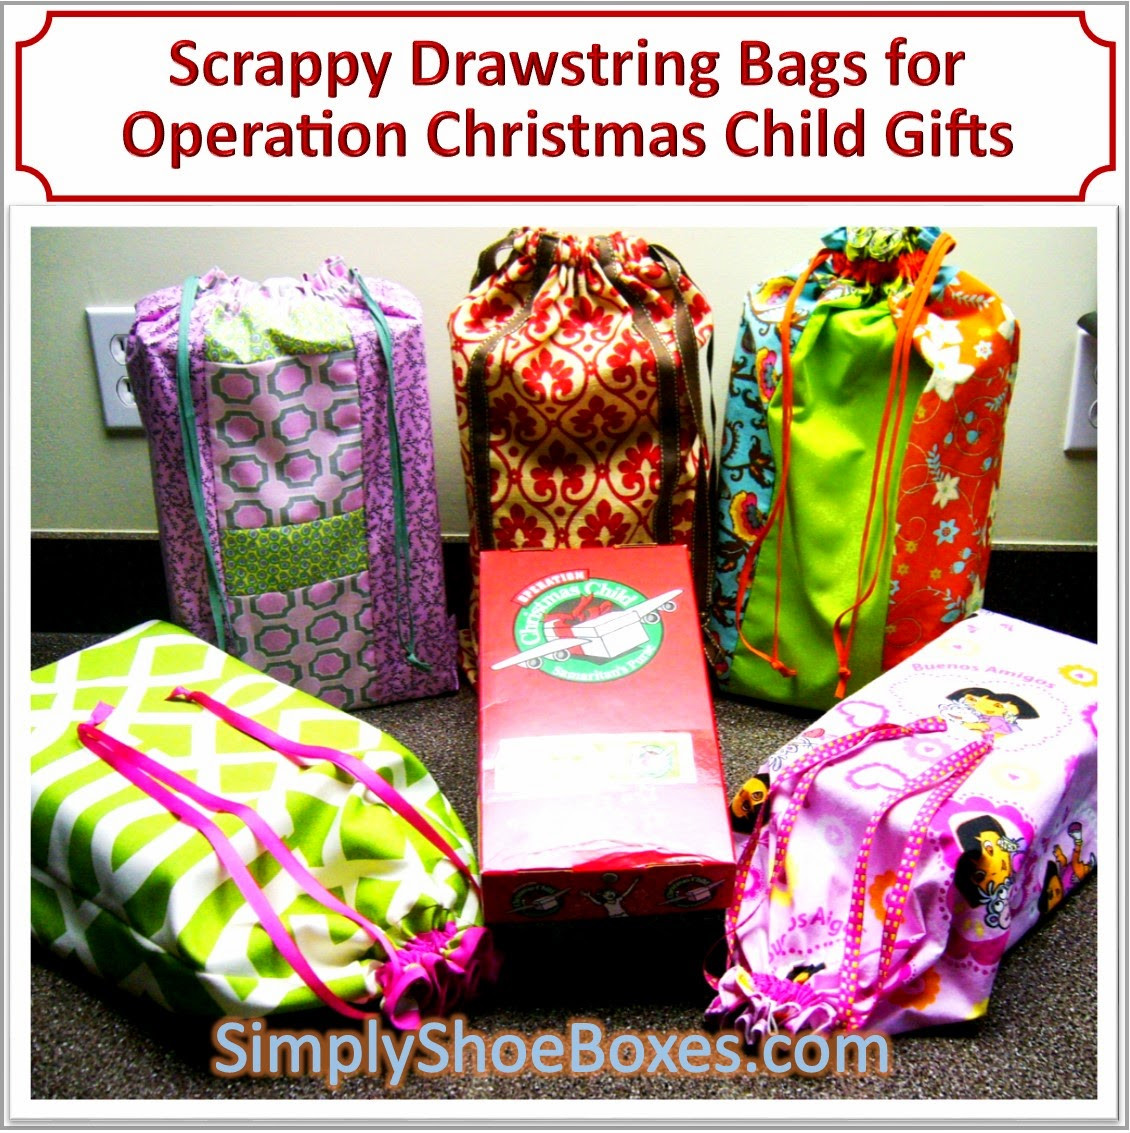 Operation Christmas Child Gifts
 Simply Shoeboxes Scrappy Drawstring Tote Bags for